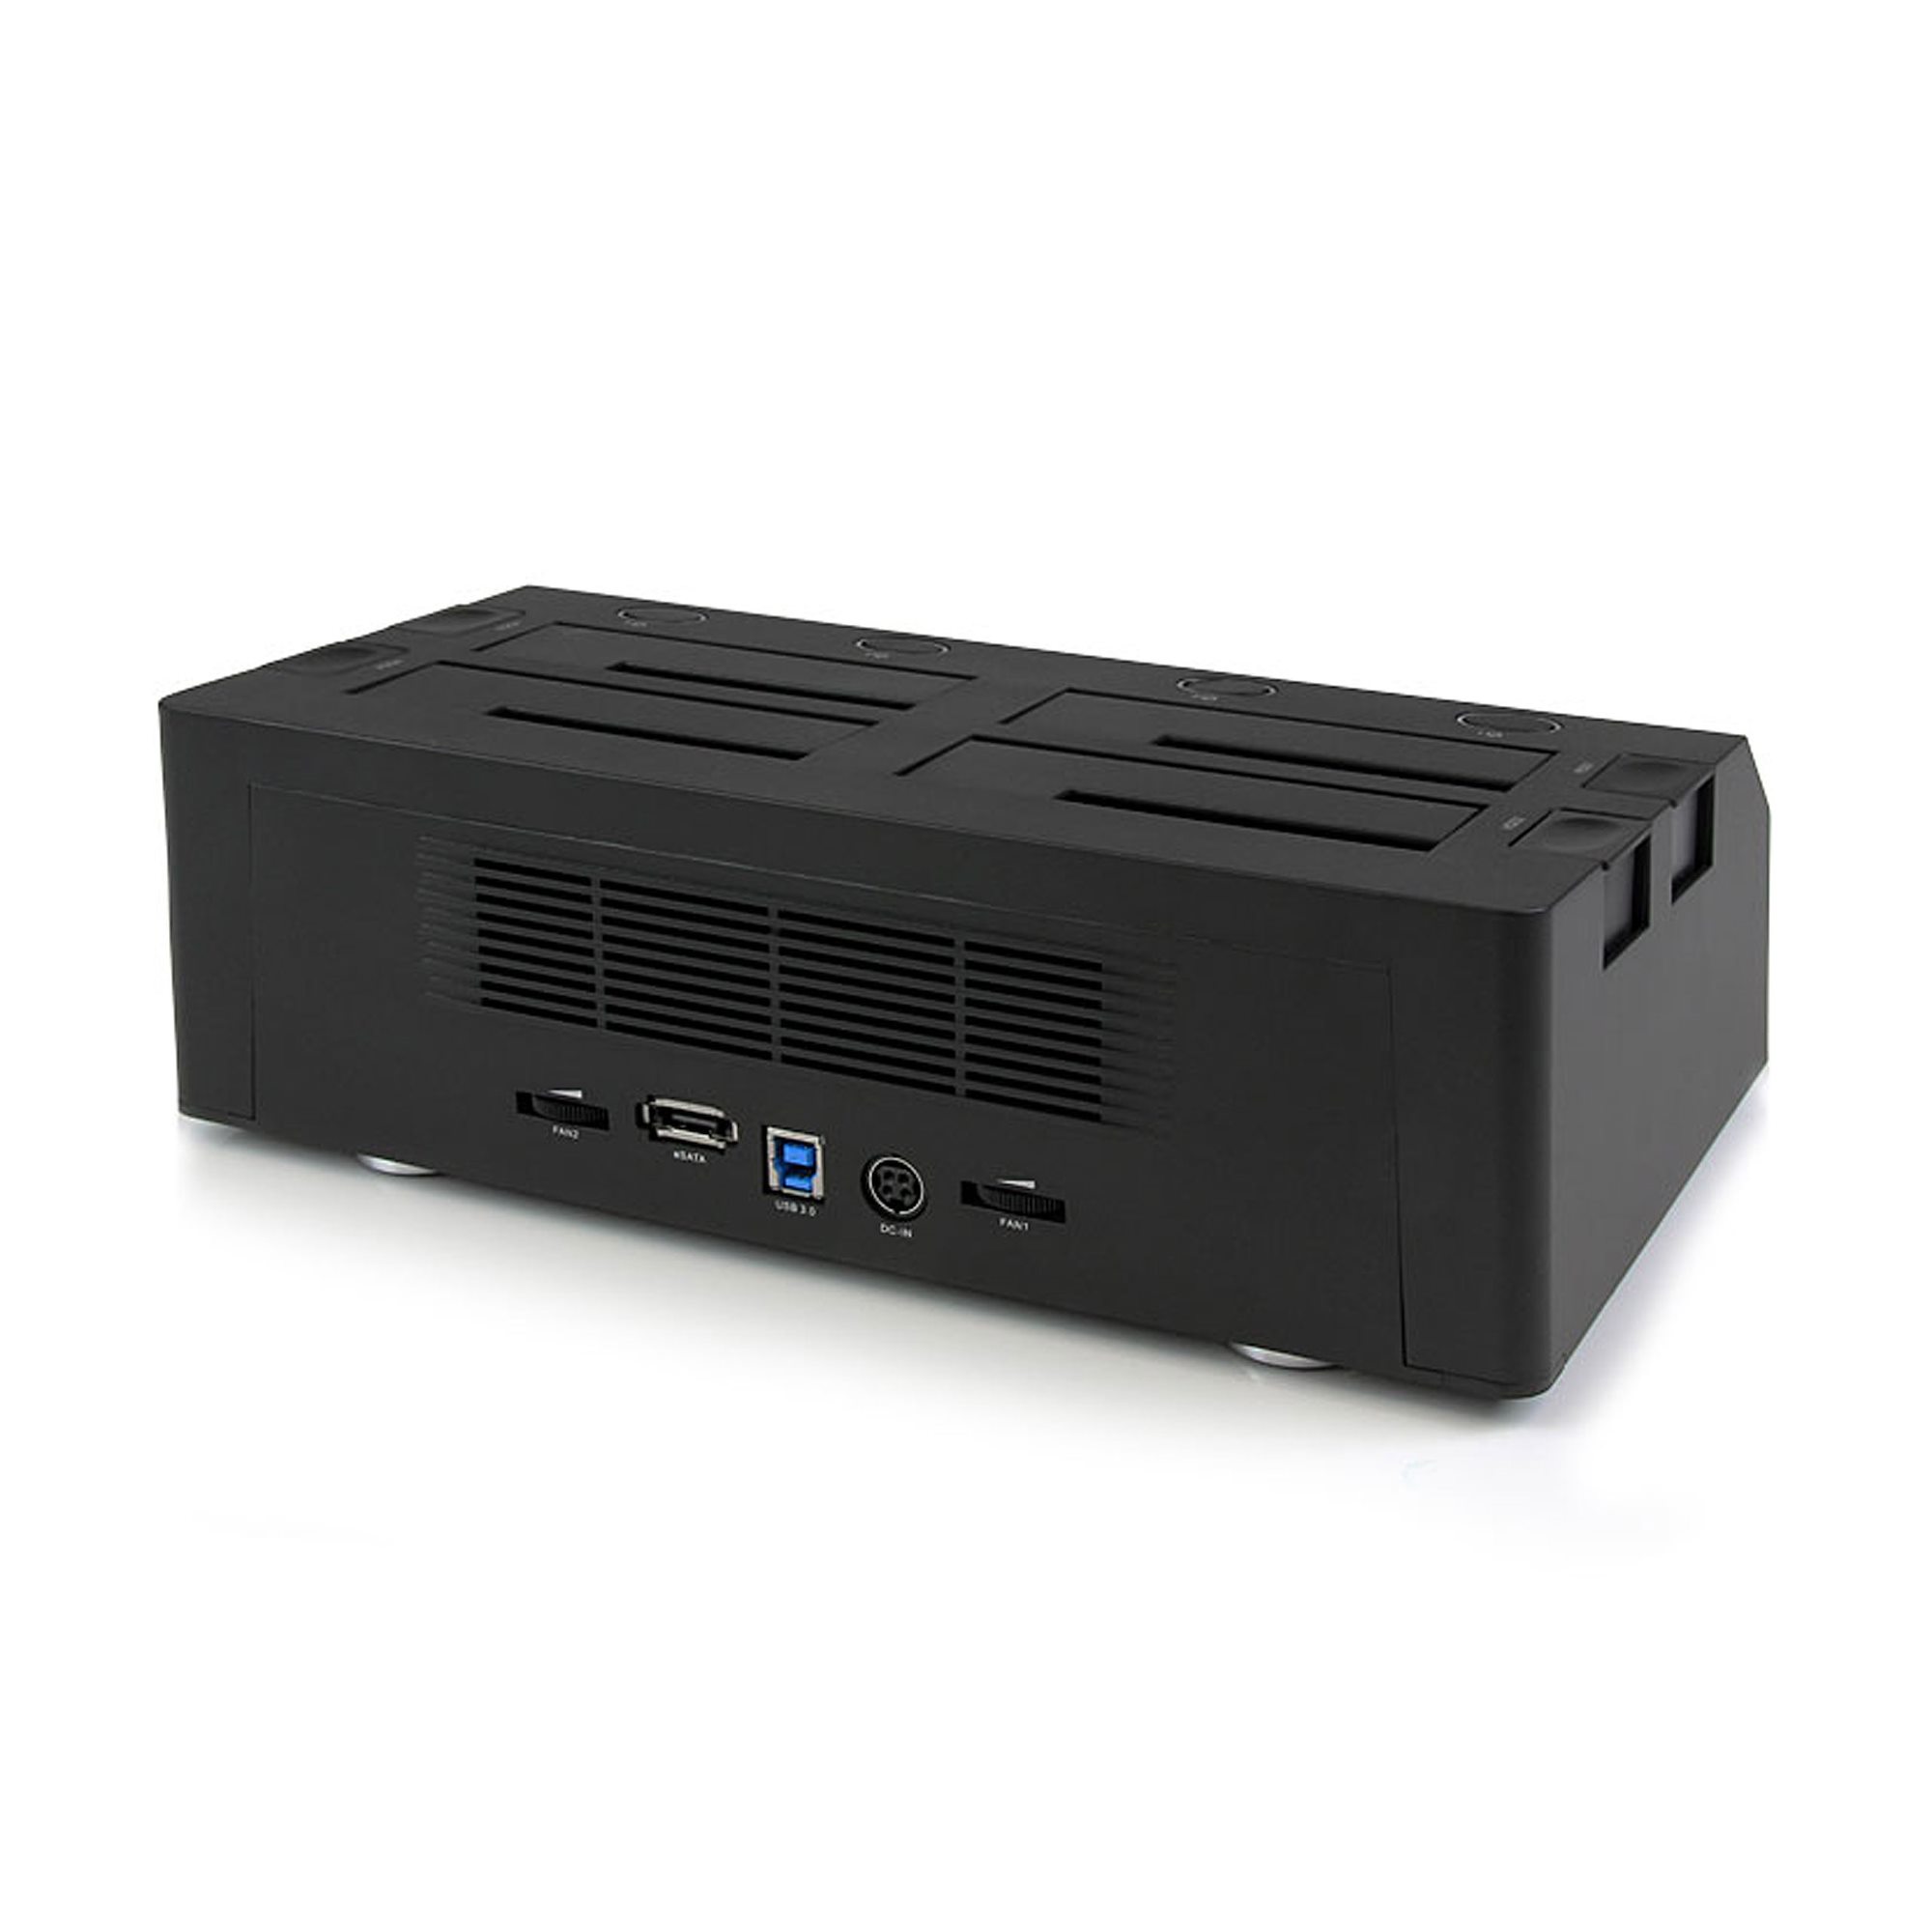 USB 3.0 eSATA HDD Docking Station w/ Fan - Stations d'accueil pour